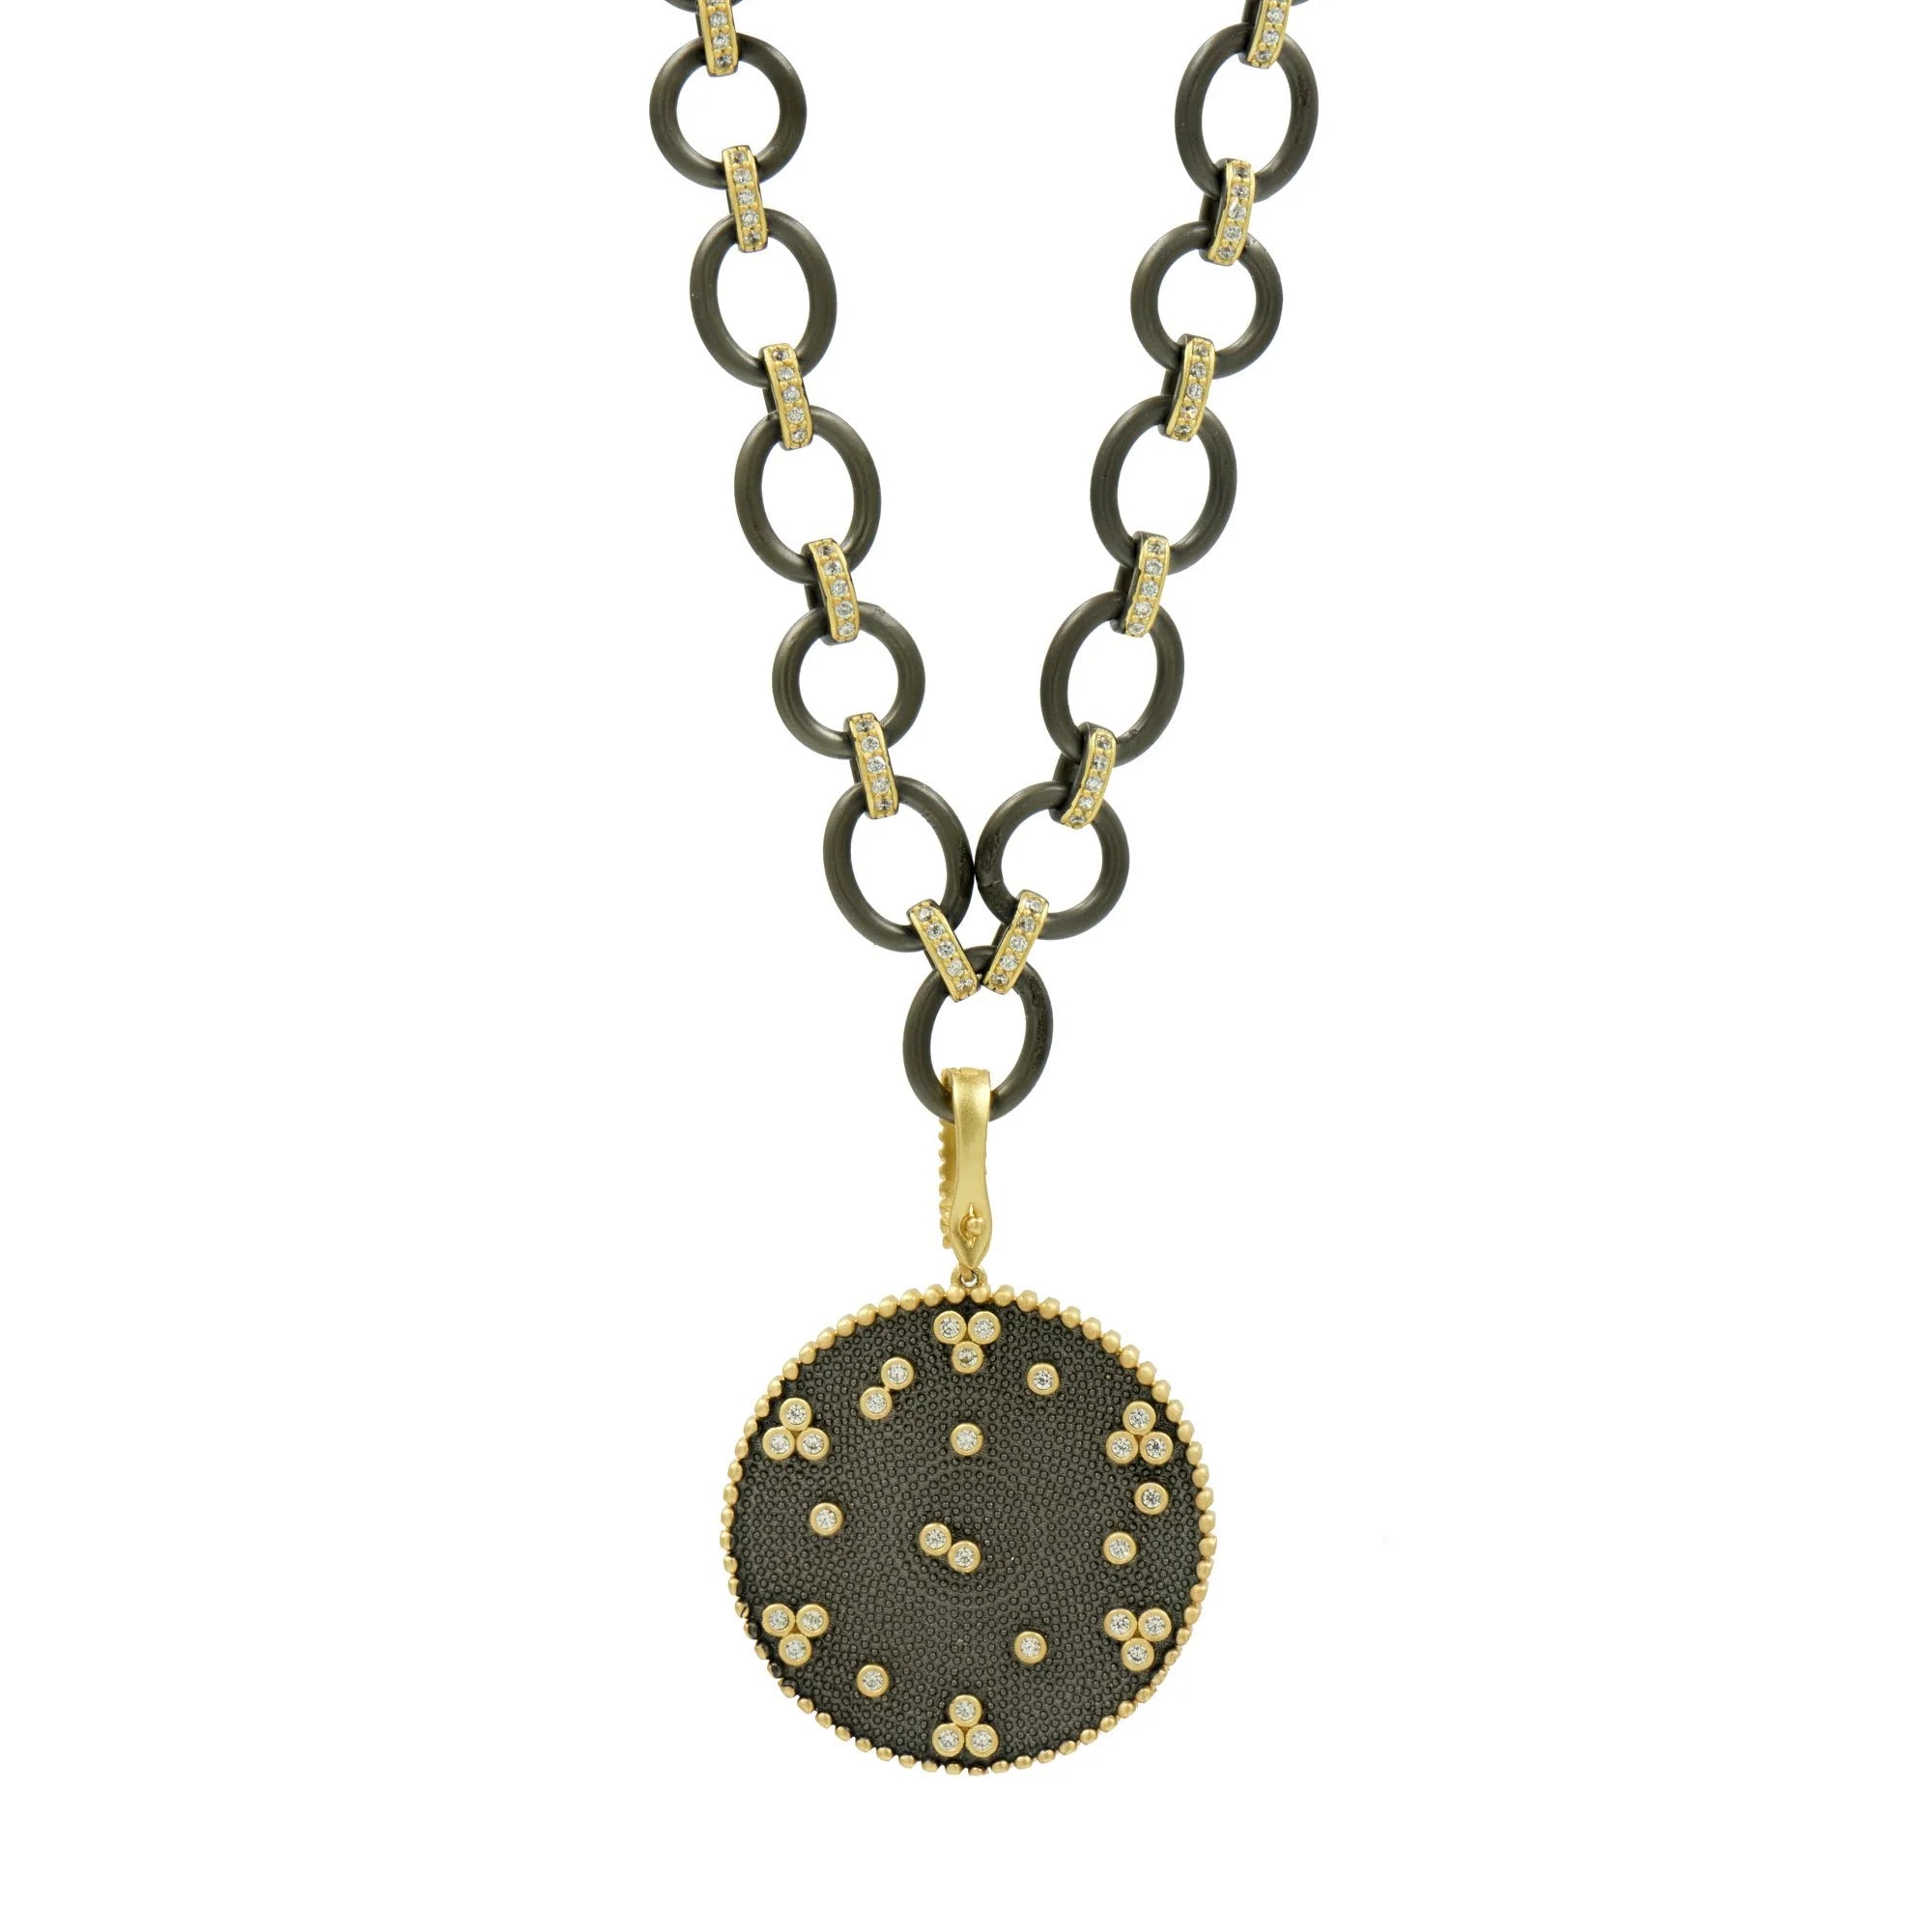 Freida Rothman "Signature Double Sided Pendant Chain Link Necklace"